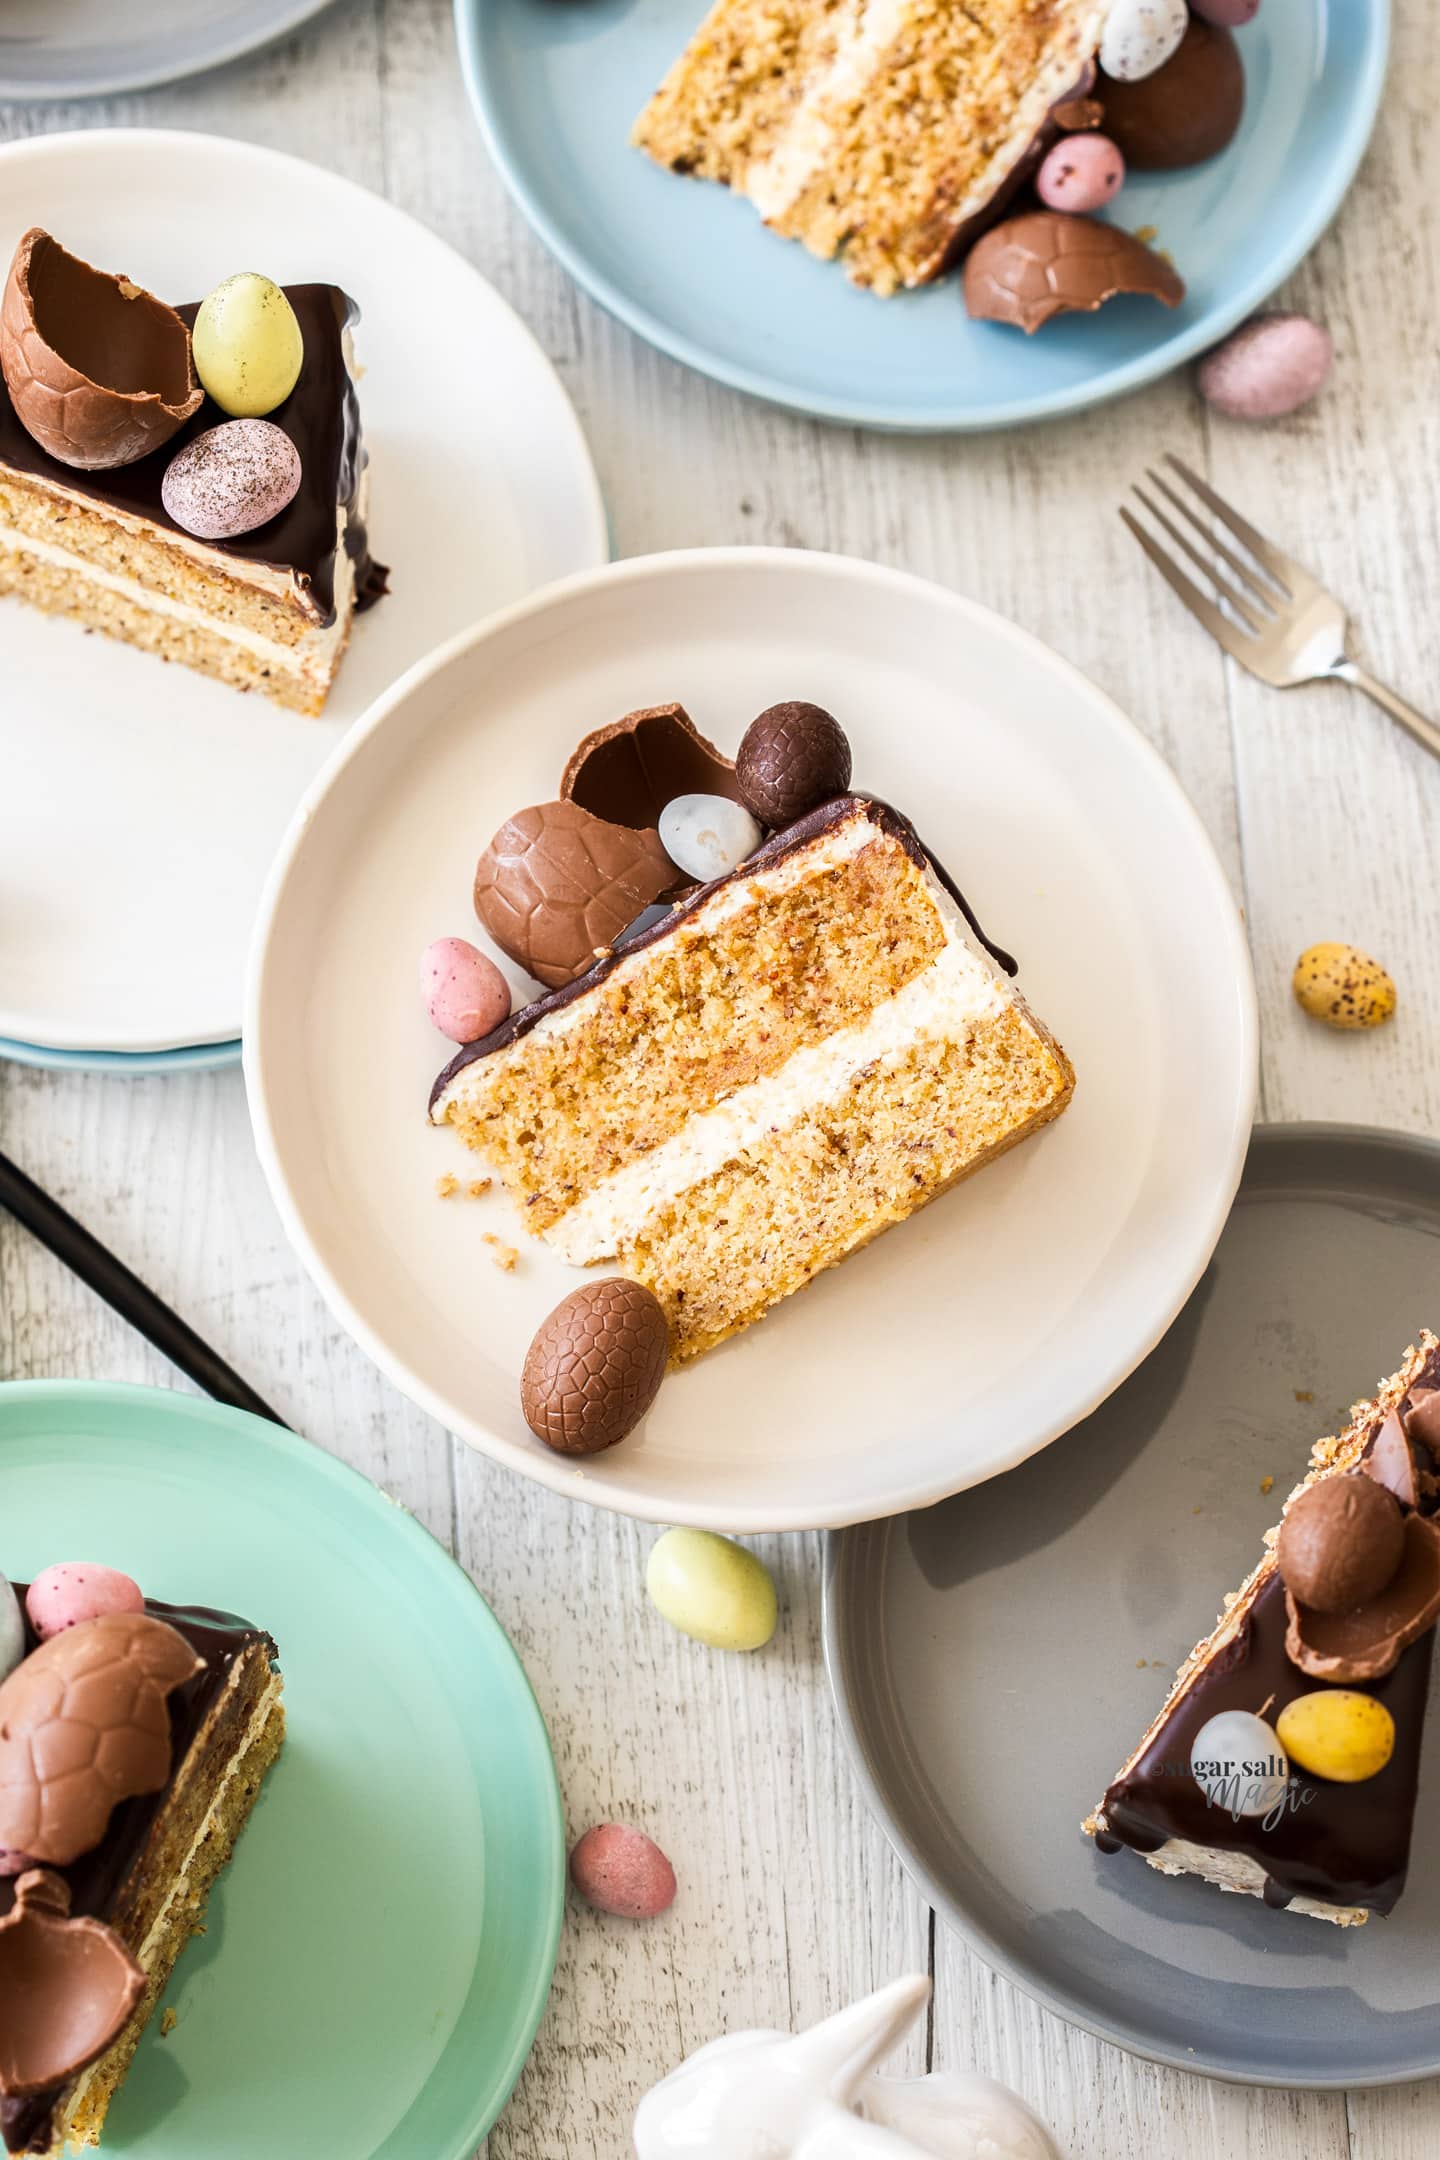 Slices of cake with Easter eggs on top on colourful plates.